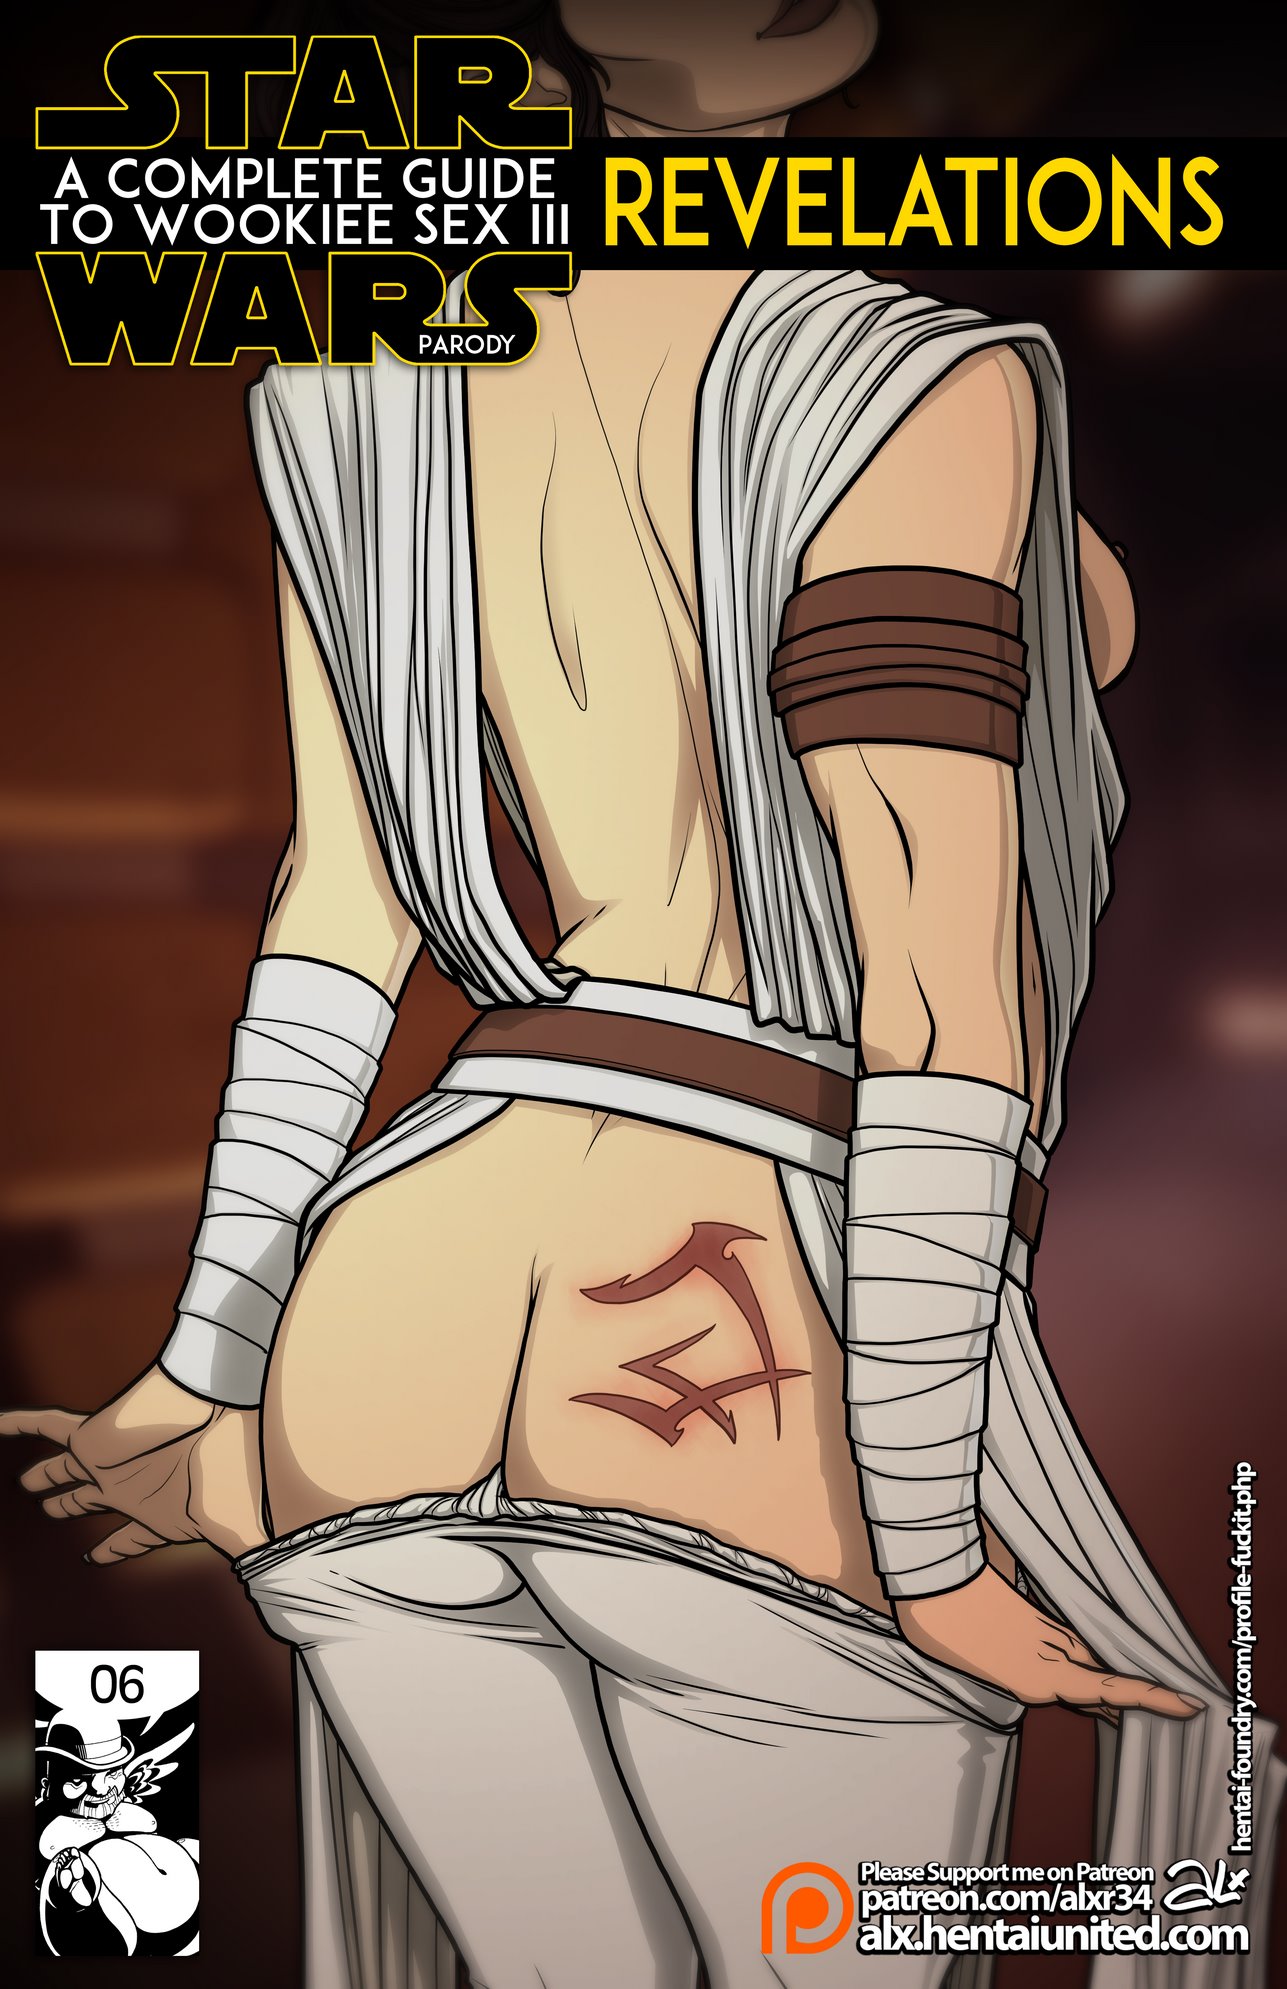 Alx) Star Wars: A Complete Guide to Wookie Sex III porn comic